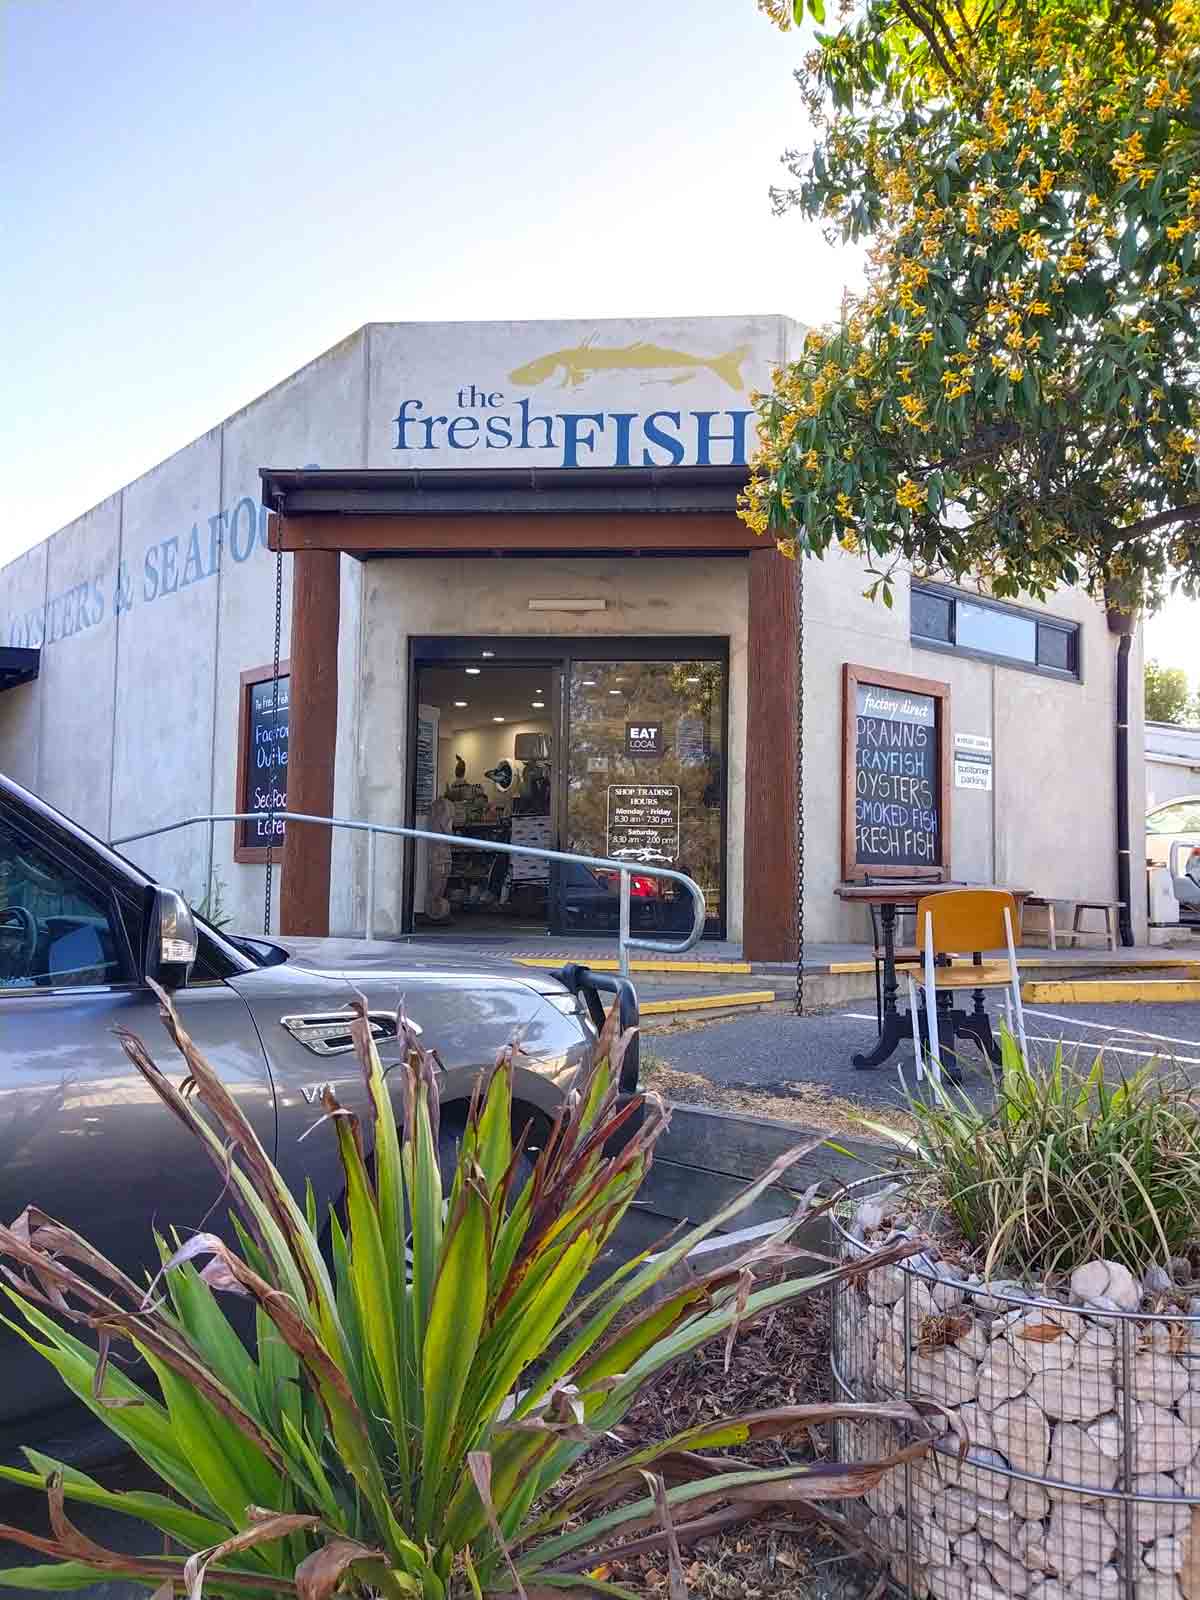 The Fresh Fish Place building. Located in Port Lincoln, Eyre Peninsula, South Australia.